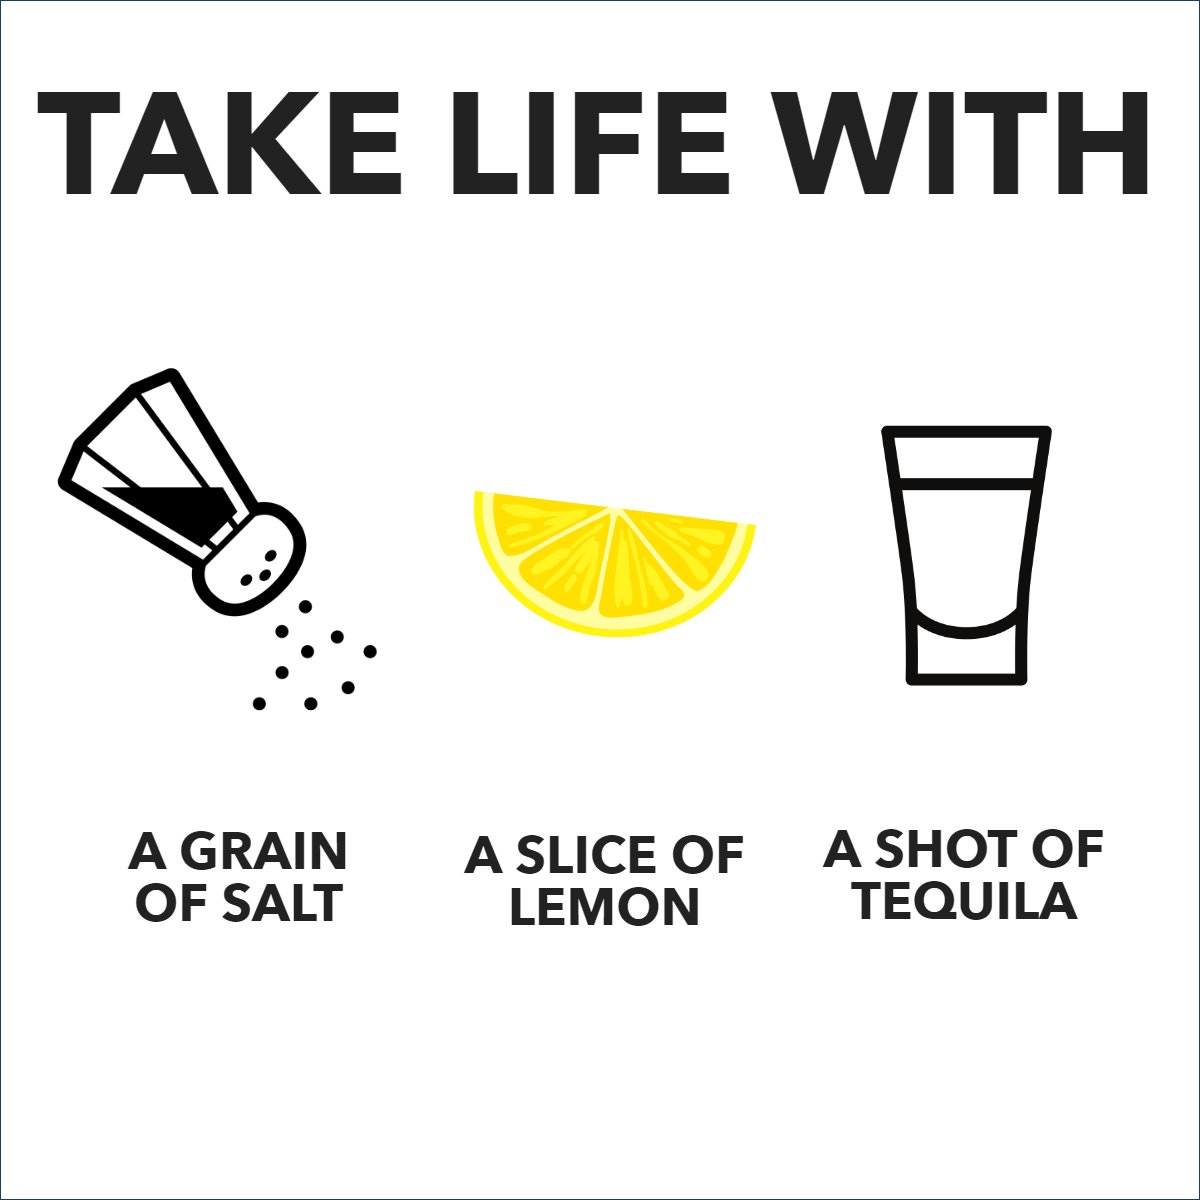 Take life with a grain of salt, a slice of lemon and a shot of tequila... 🧂🍋🥃

#lifeisbetteratthebeach    #tequilashots    #makelifebetter    #lemonslice    #tequilashot    #positive    #positivethinking